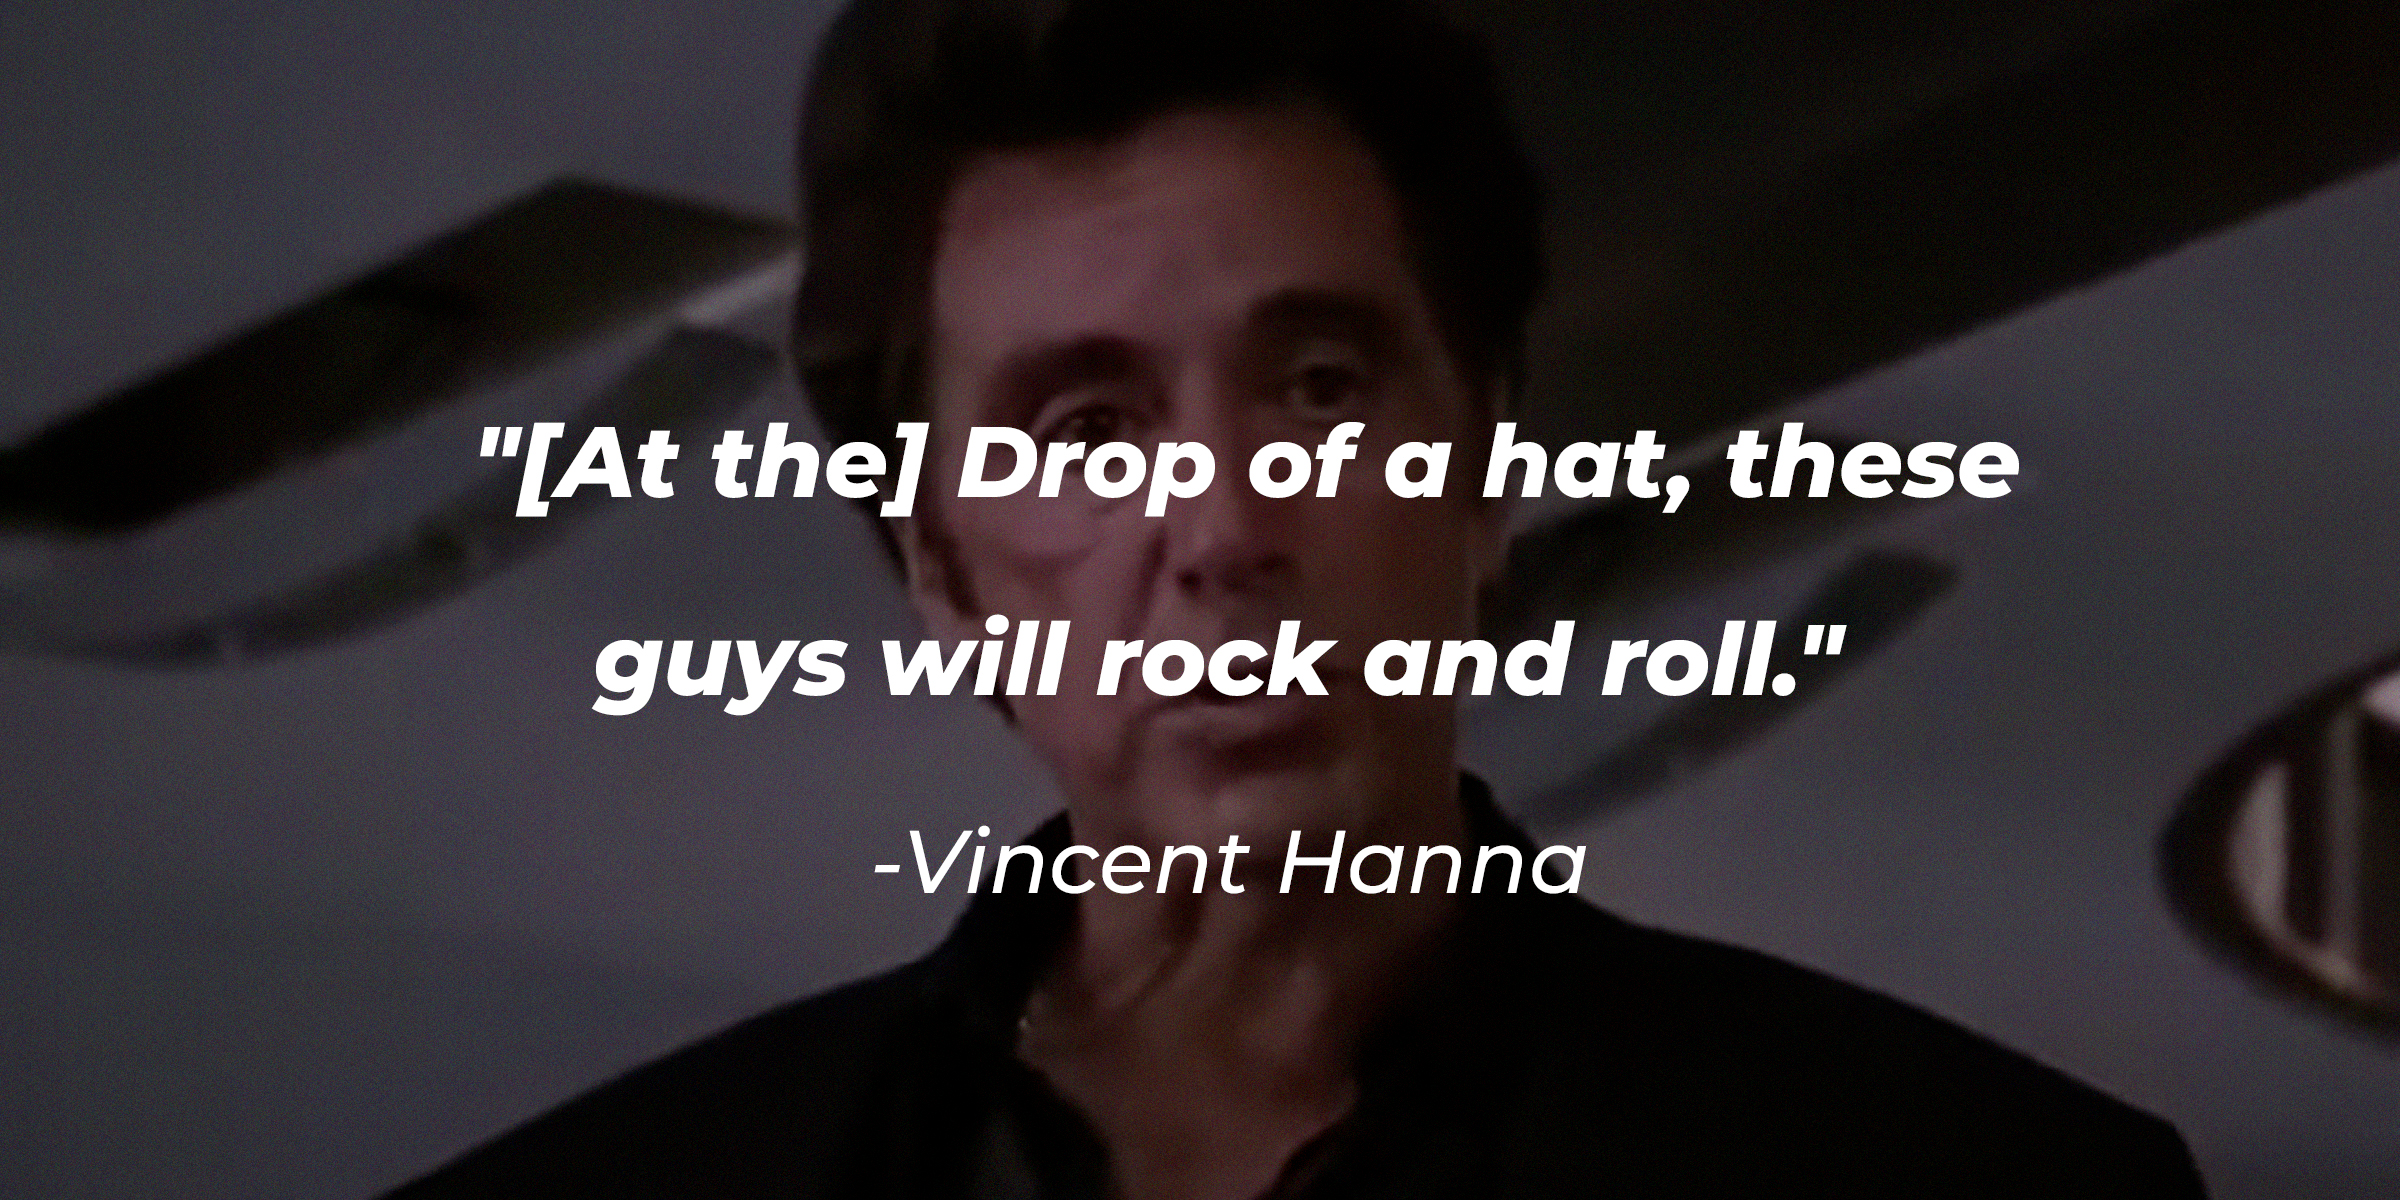 A photo of Vincent Hanna from the "Heat" movie with his quote: "[At the] Drop of a hat, these guys will rock and roll." | Source: facebook.com/HeatMovie